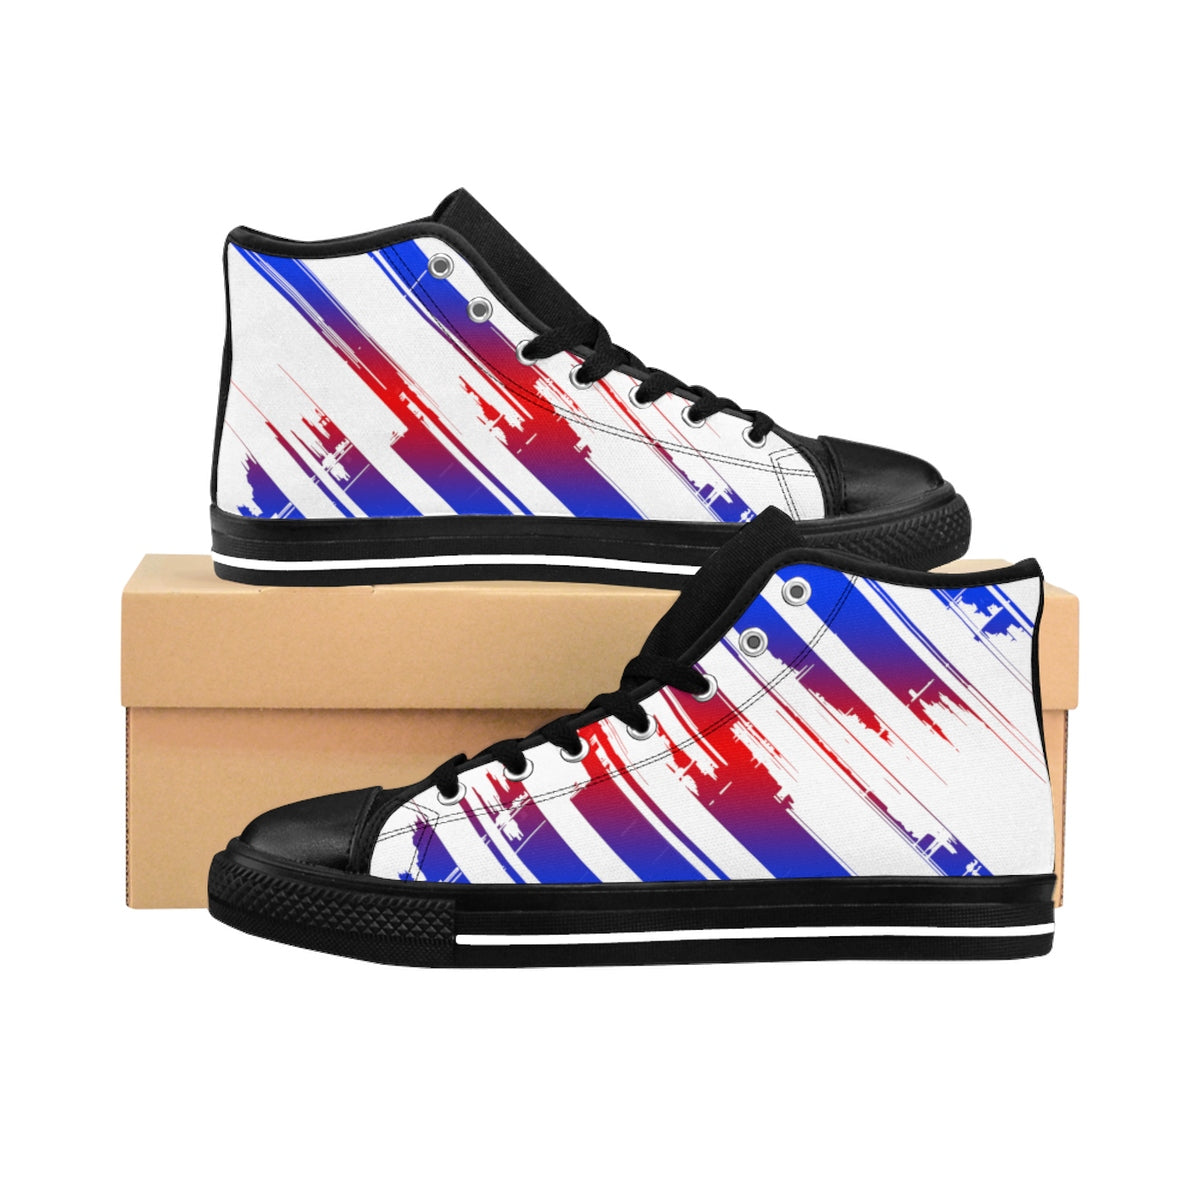 The Edge Of Insanity / Blue & Red / Men's High-top Sneakers